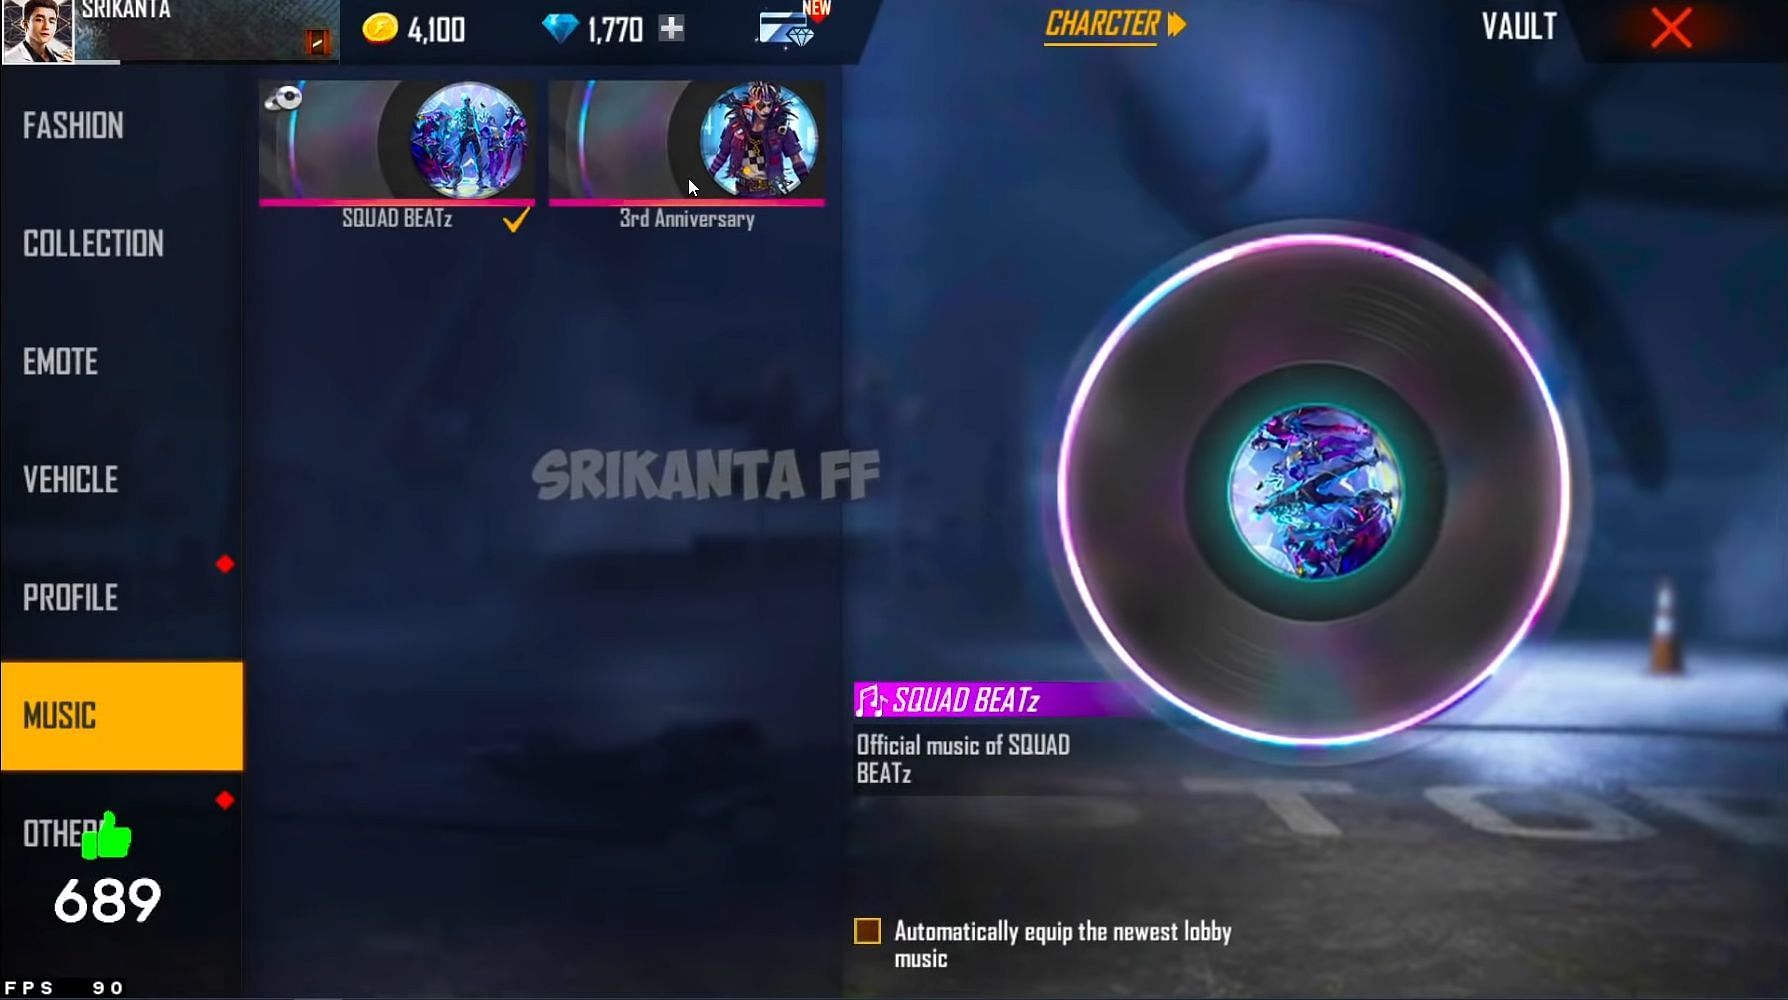 Music section could be added with Free Fire OB32 update (Image via YouTube/Srikanta)